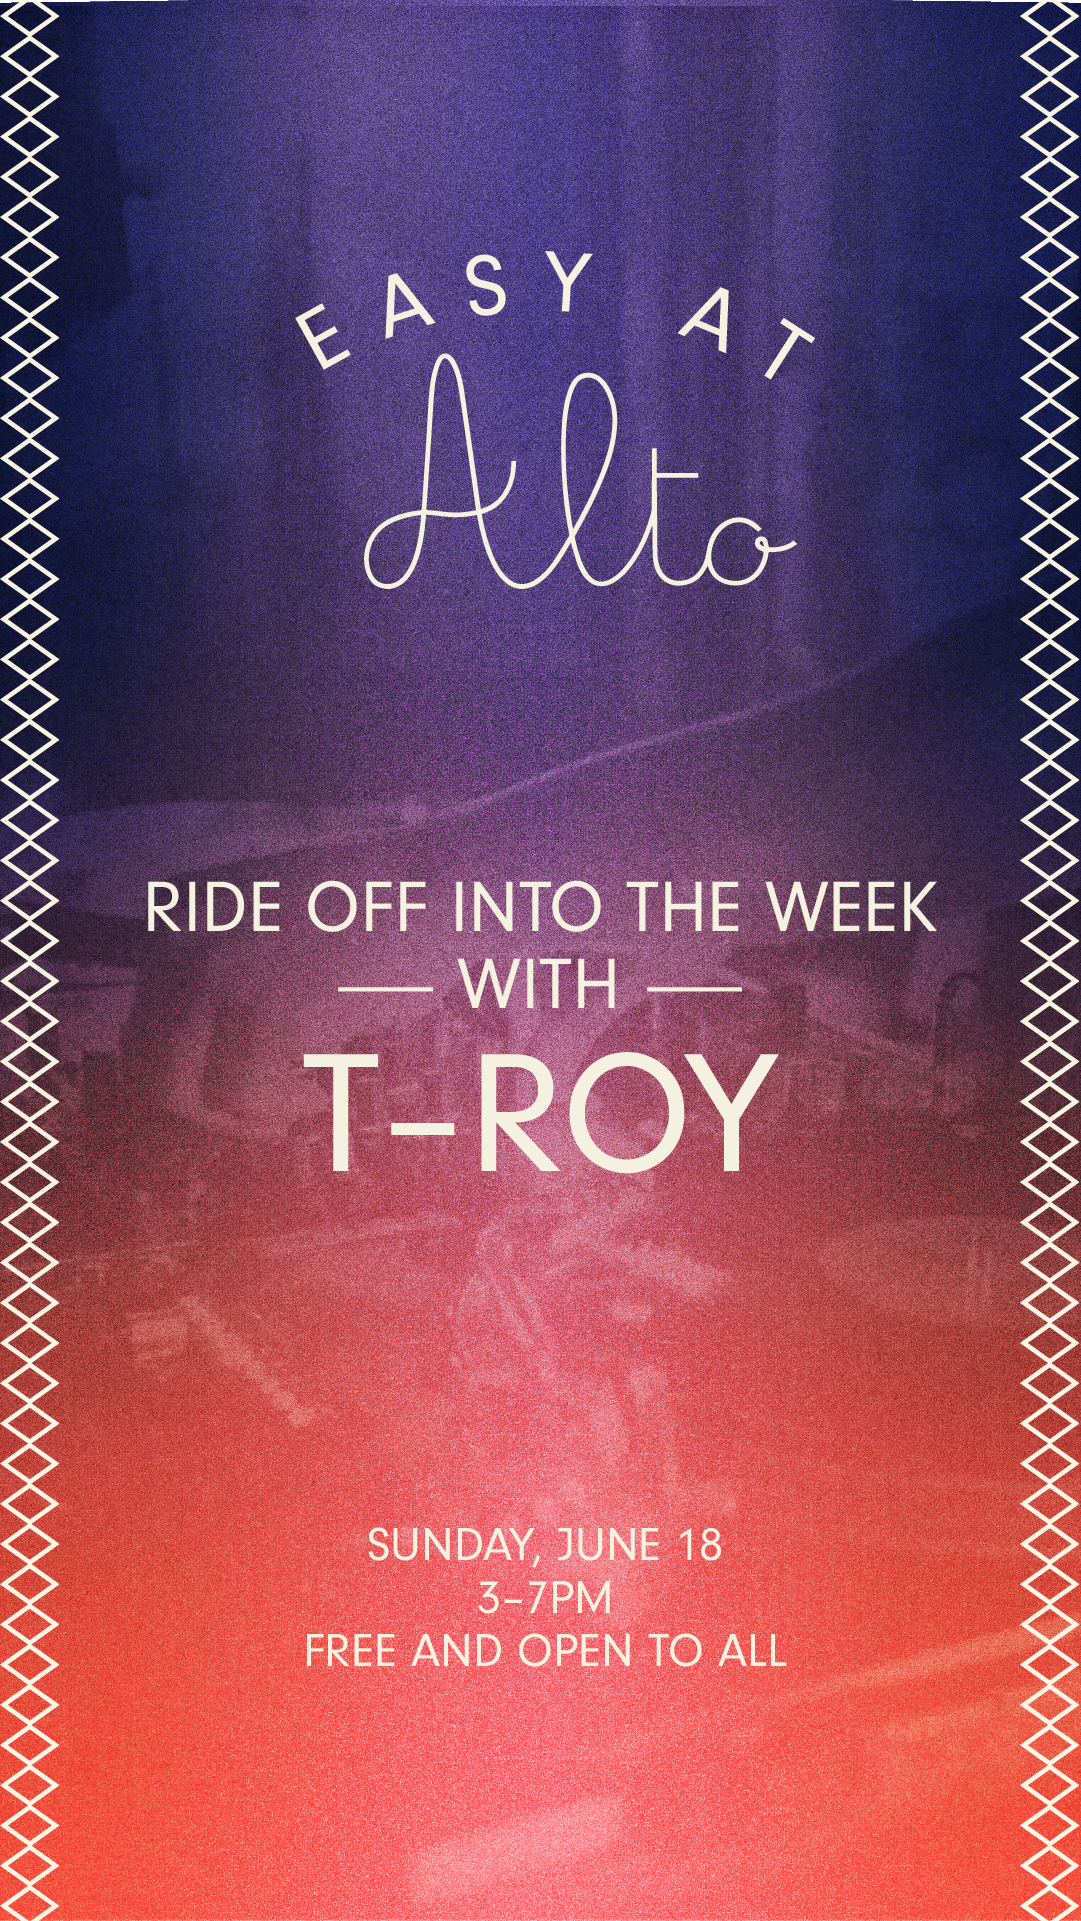 Easy At Alto with T-Roy